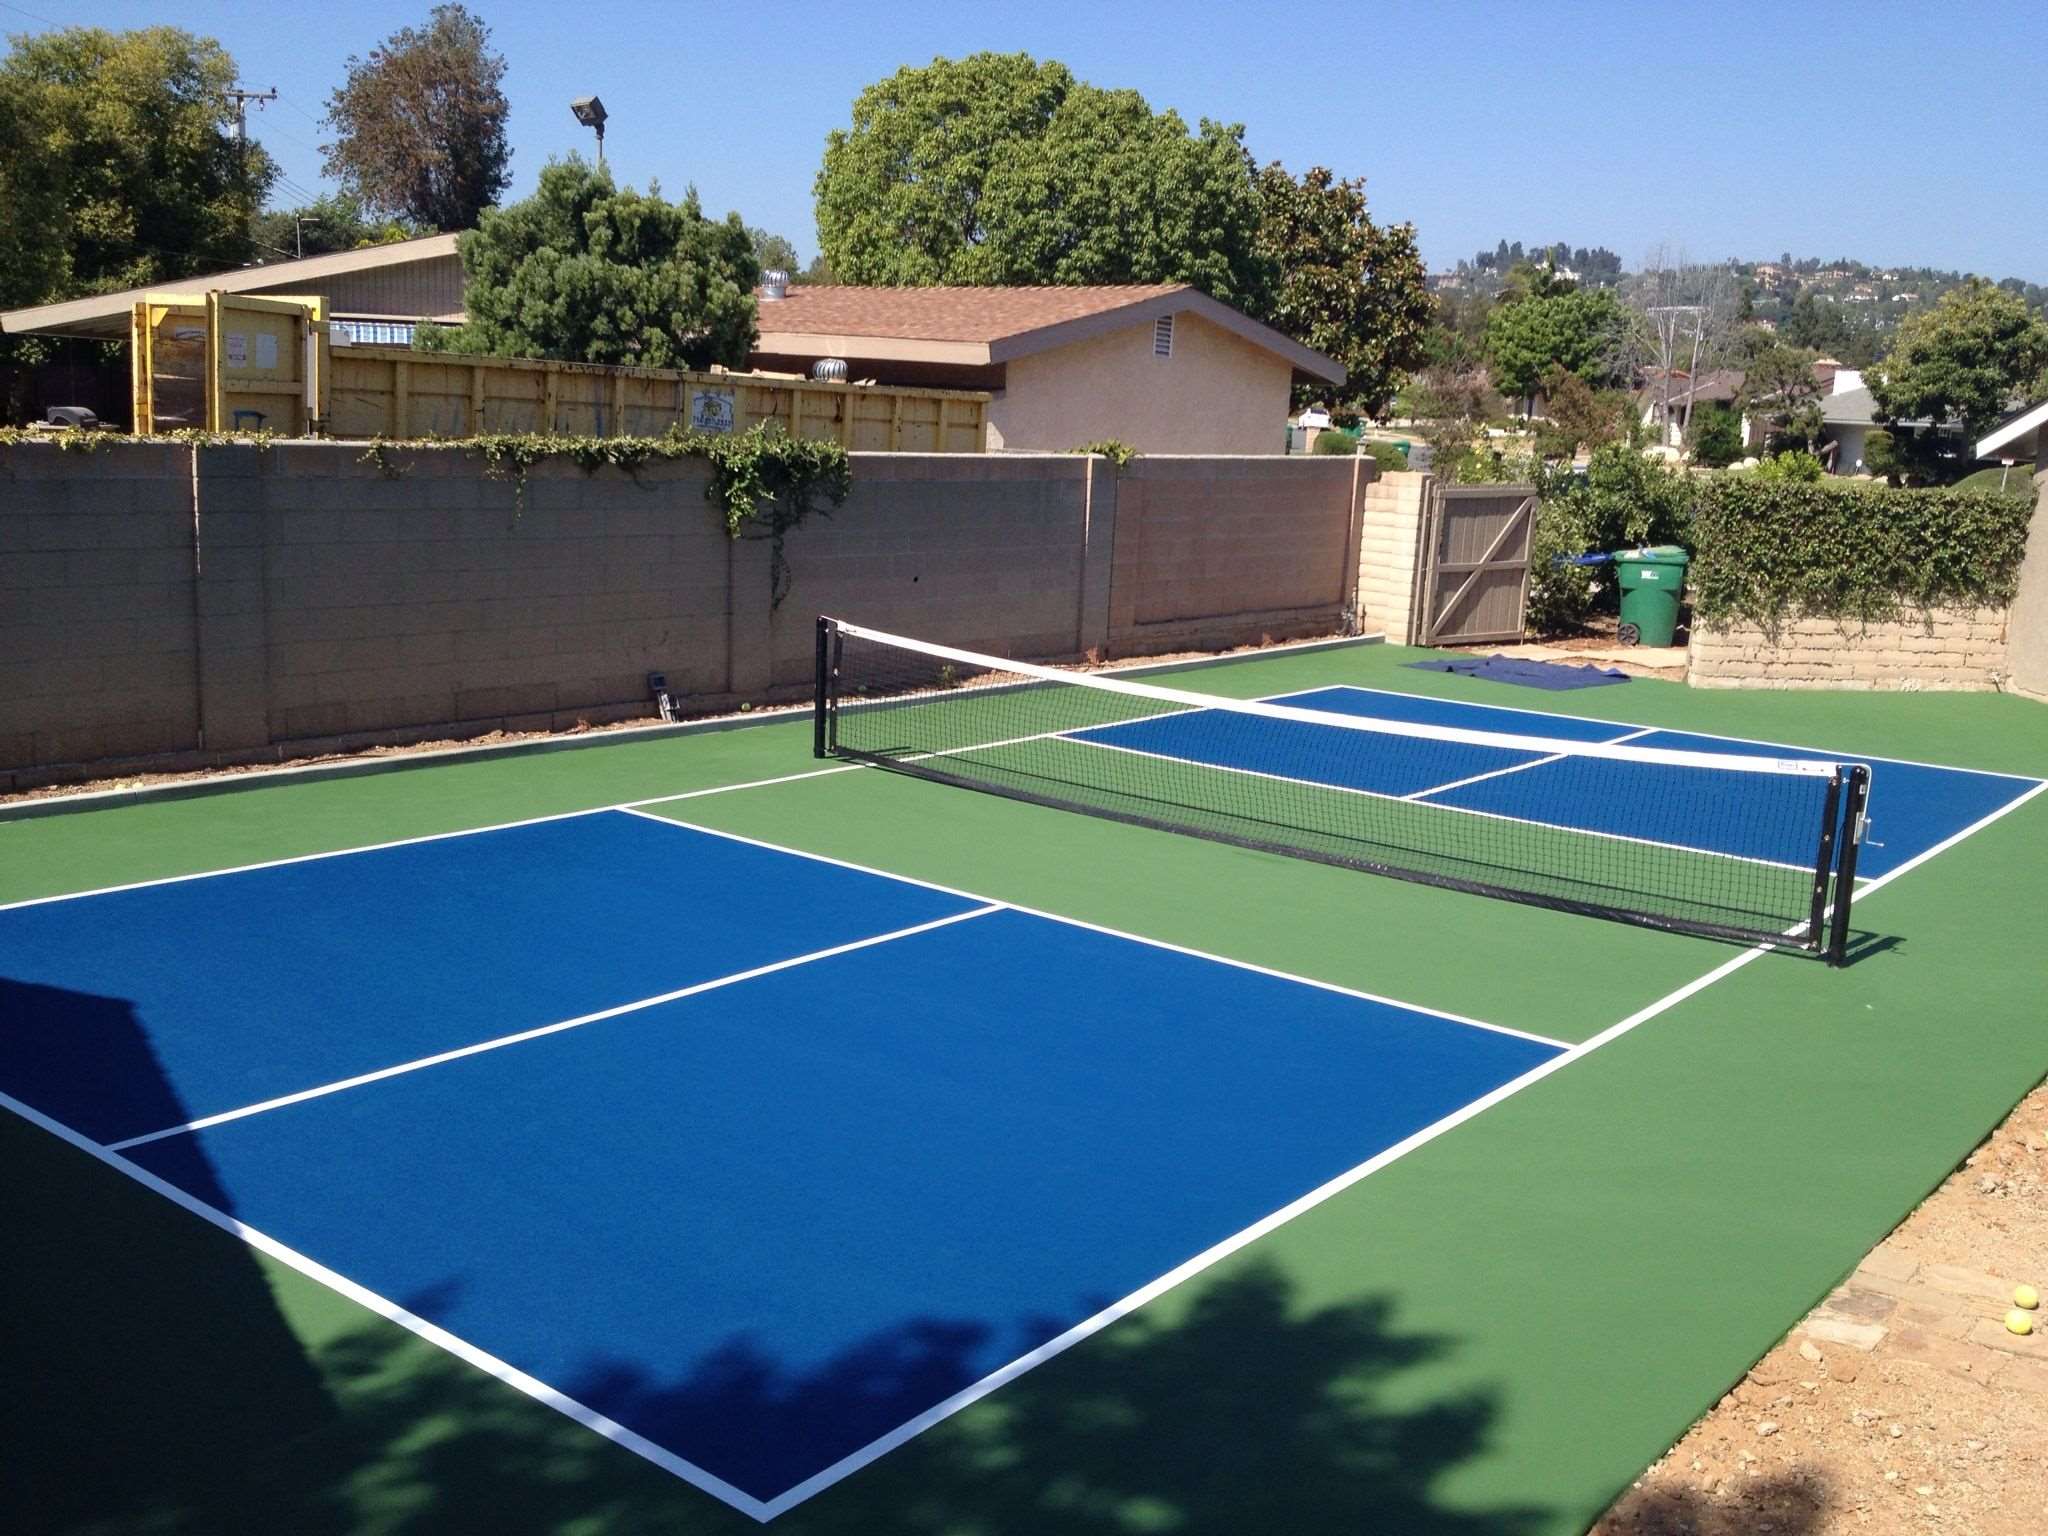 How Much Does It Cost To Build A Pickleball Court In Your Backyard